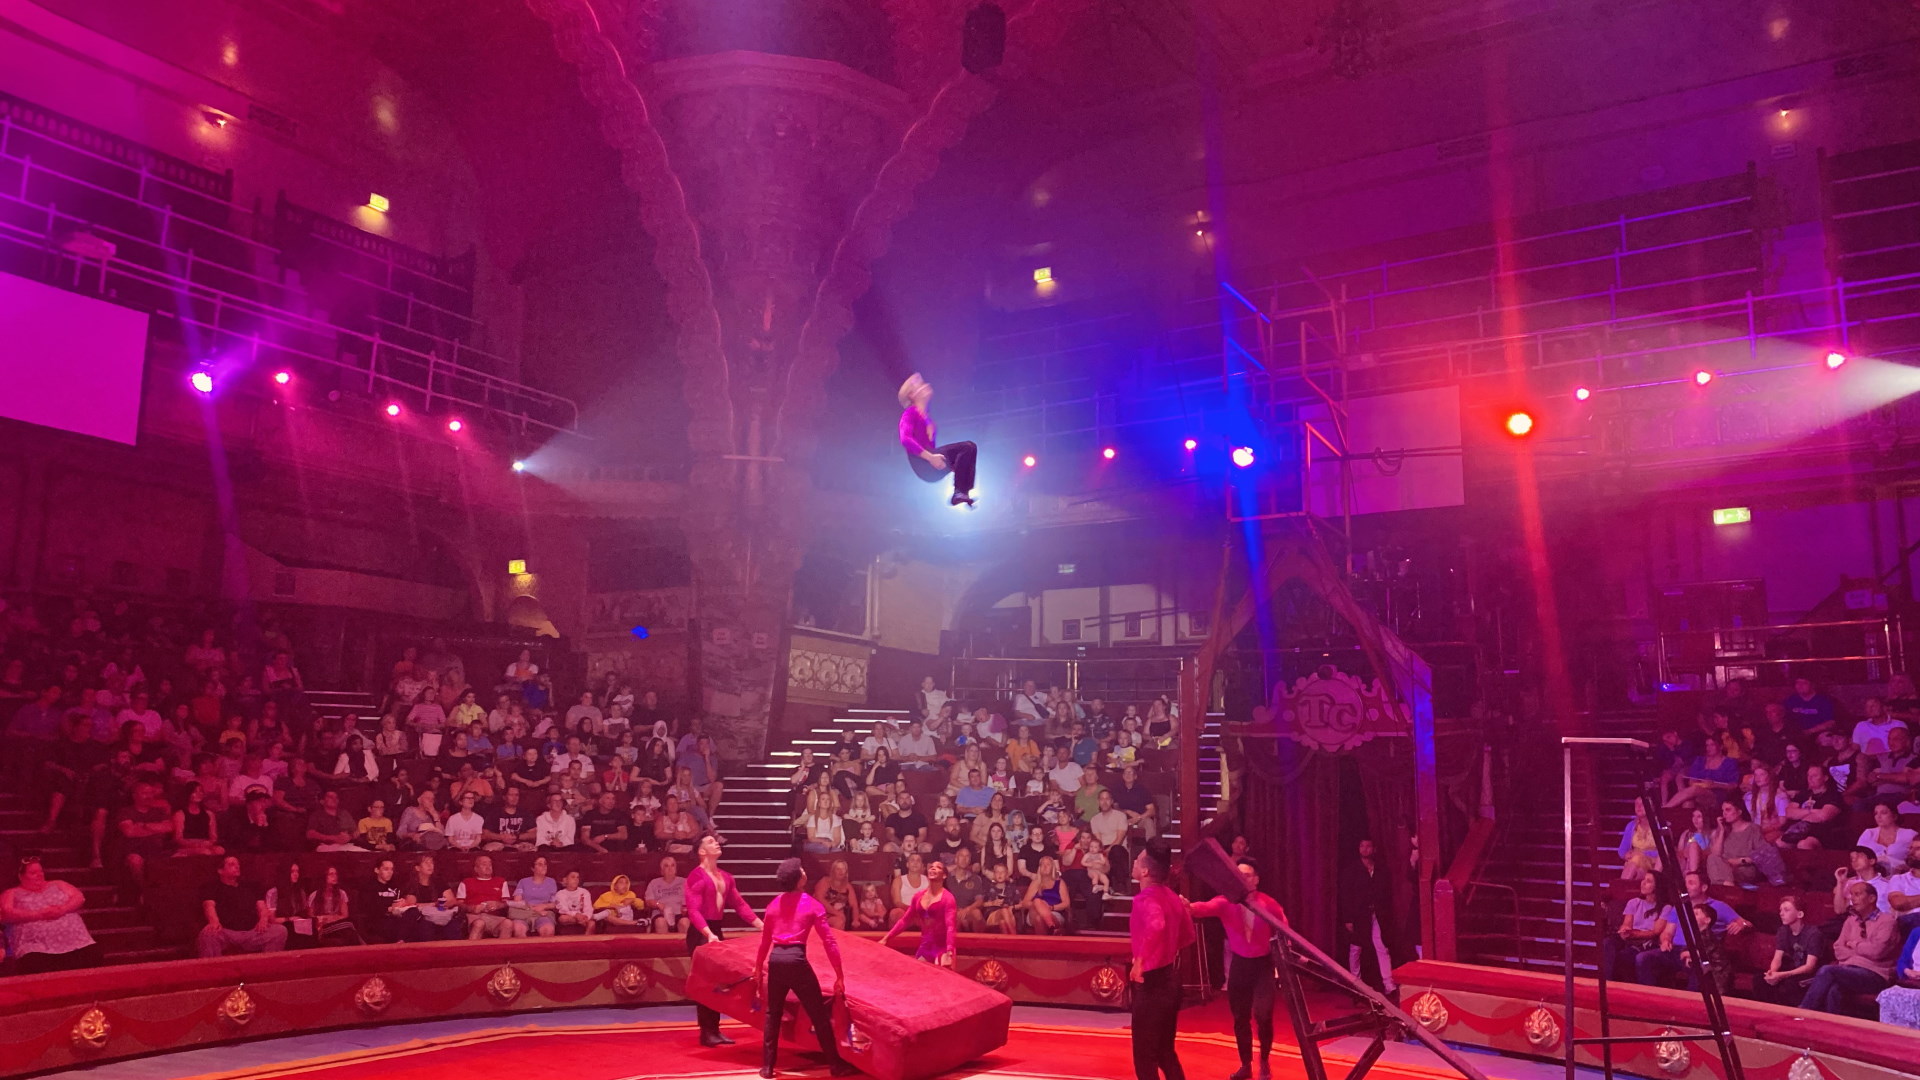 The Blackpool Tower Circus - Springboard Act